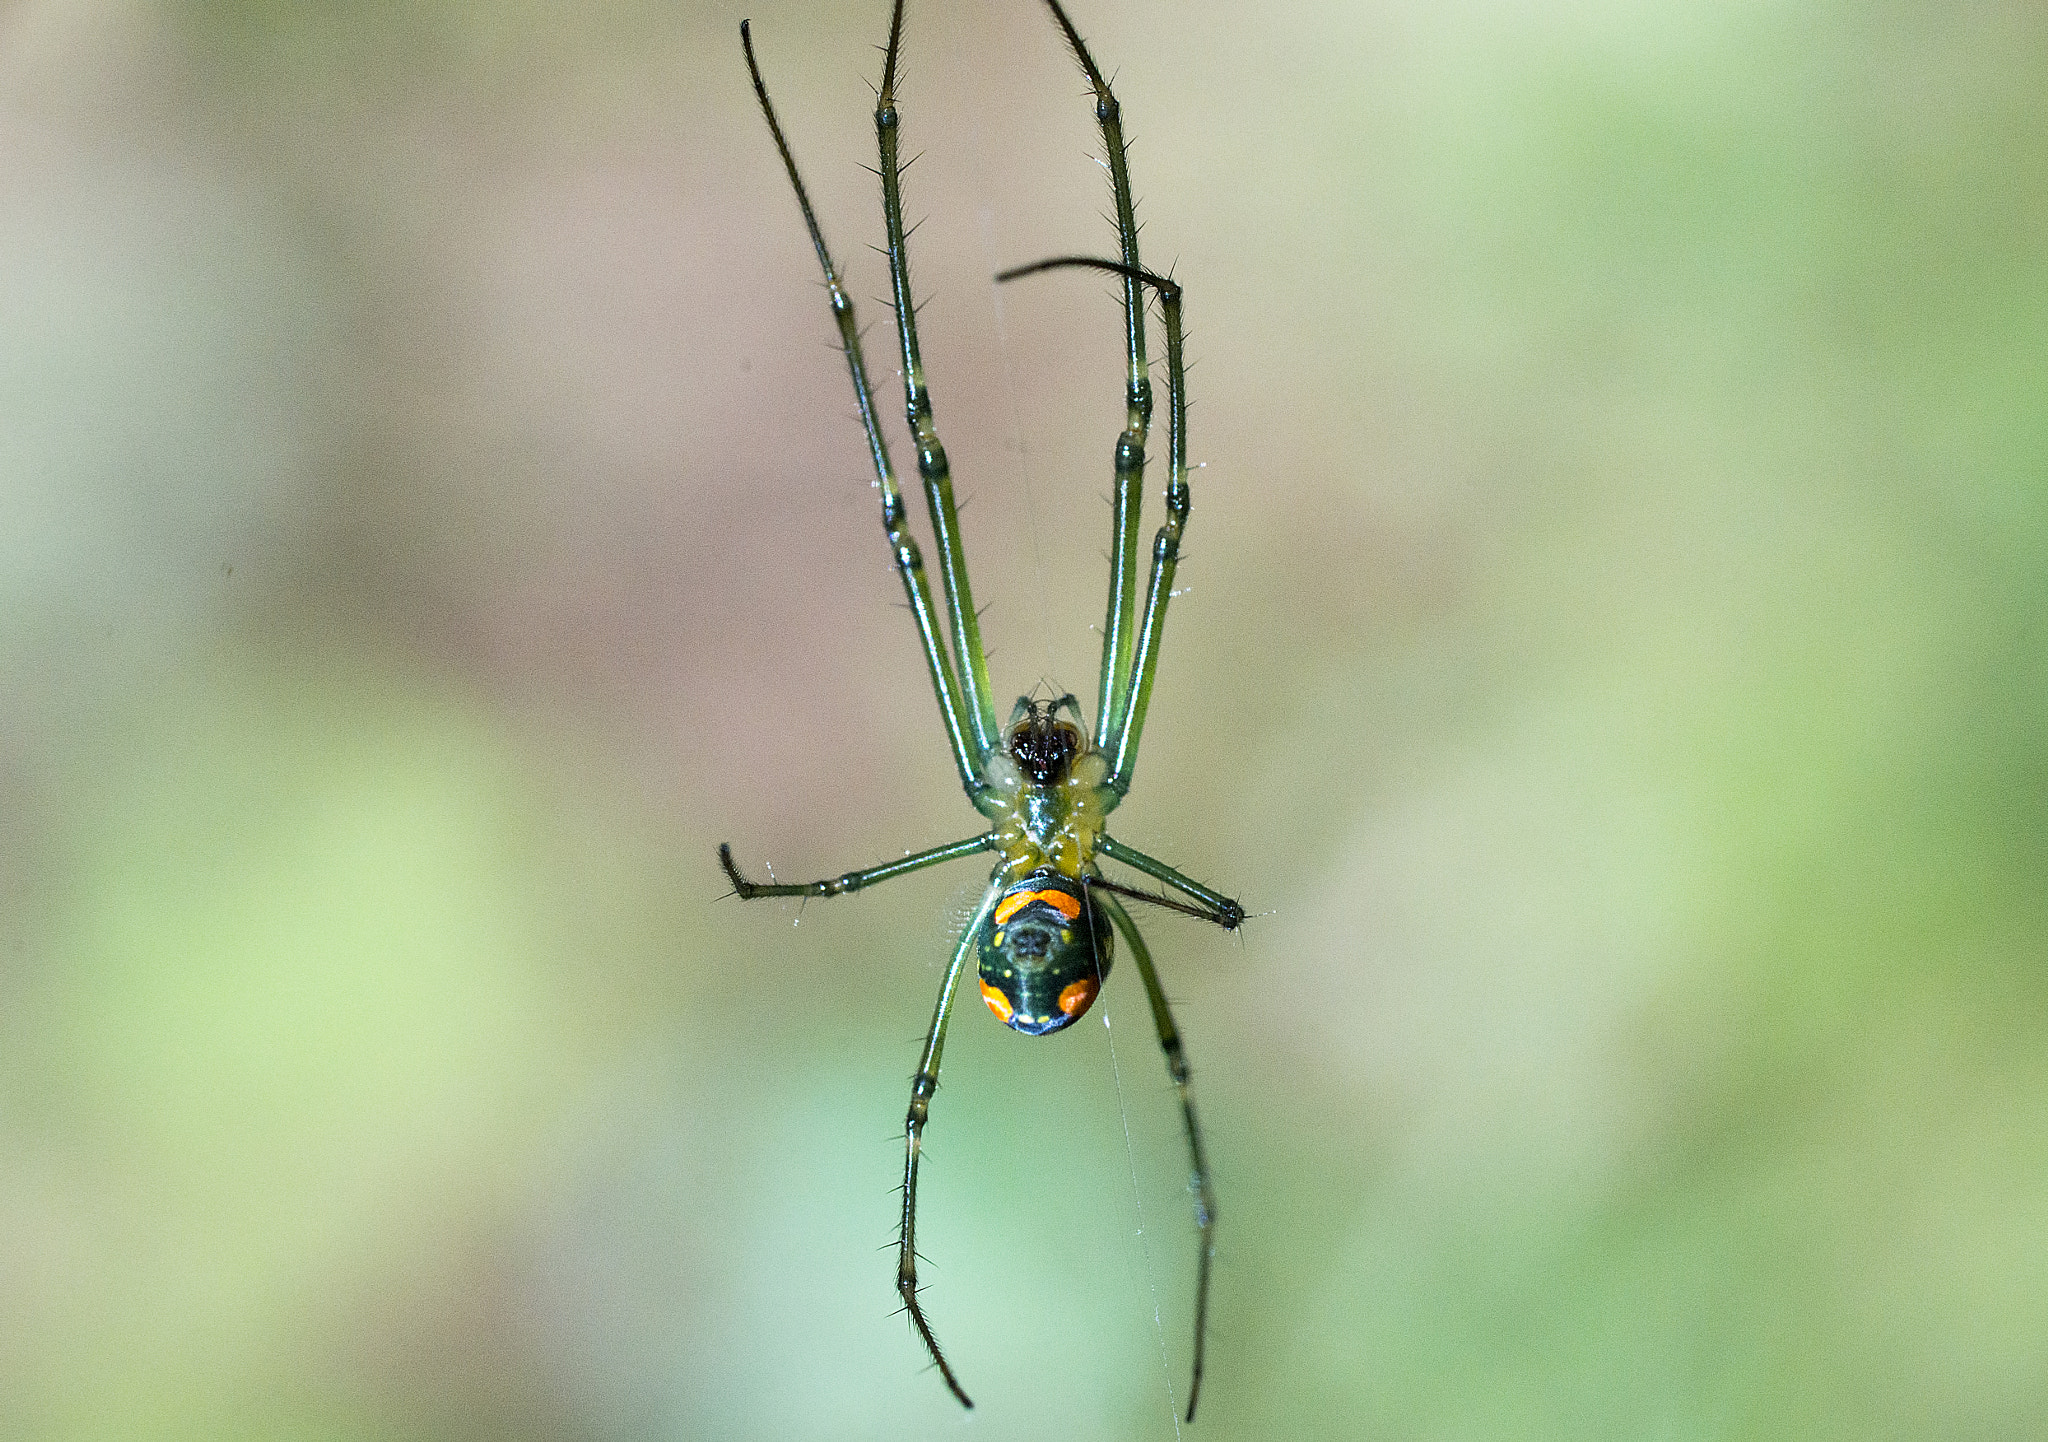 Sony a99 II sample photo. Spider photography